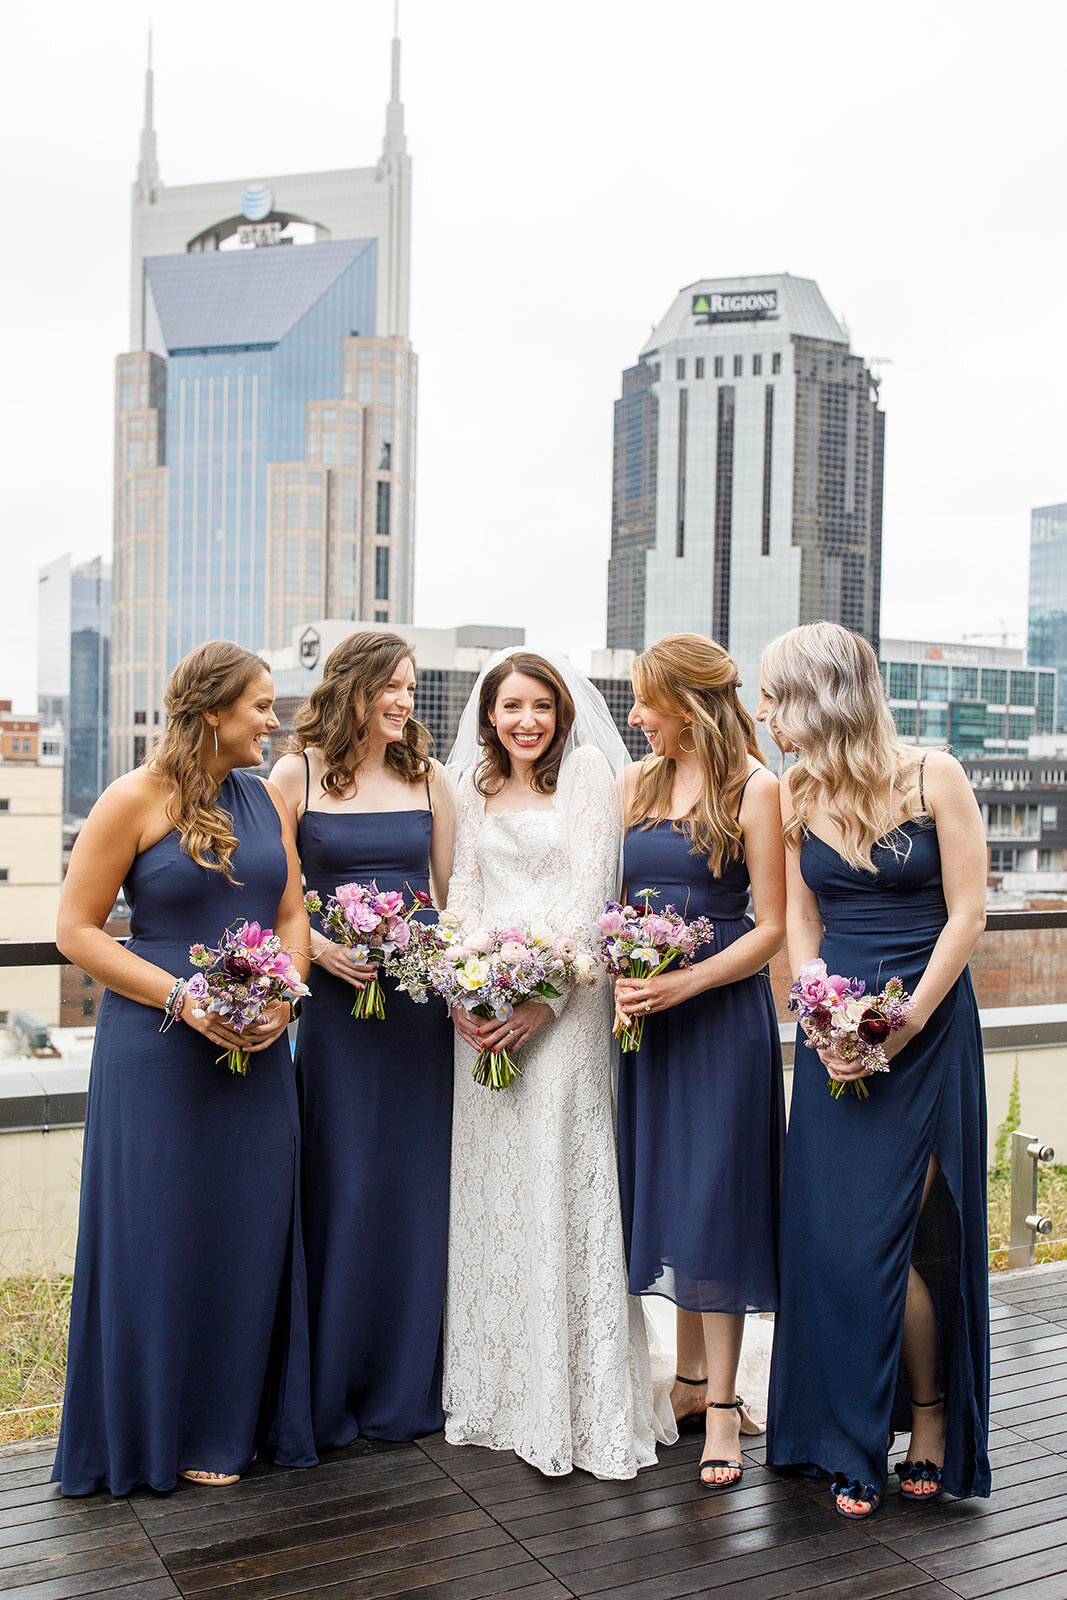 Monochromatic Lavender, Lilac, and Mauve Wedding at 21C Museum in Nashville. Nashville wedding floral designer, Rosemary & Finch.